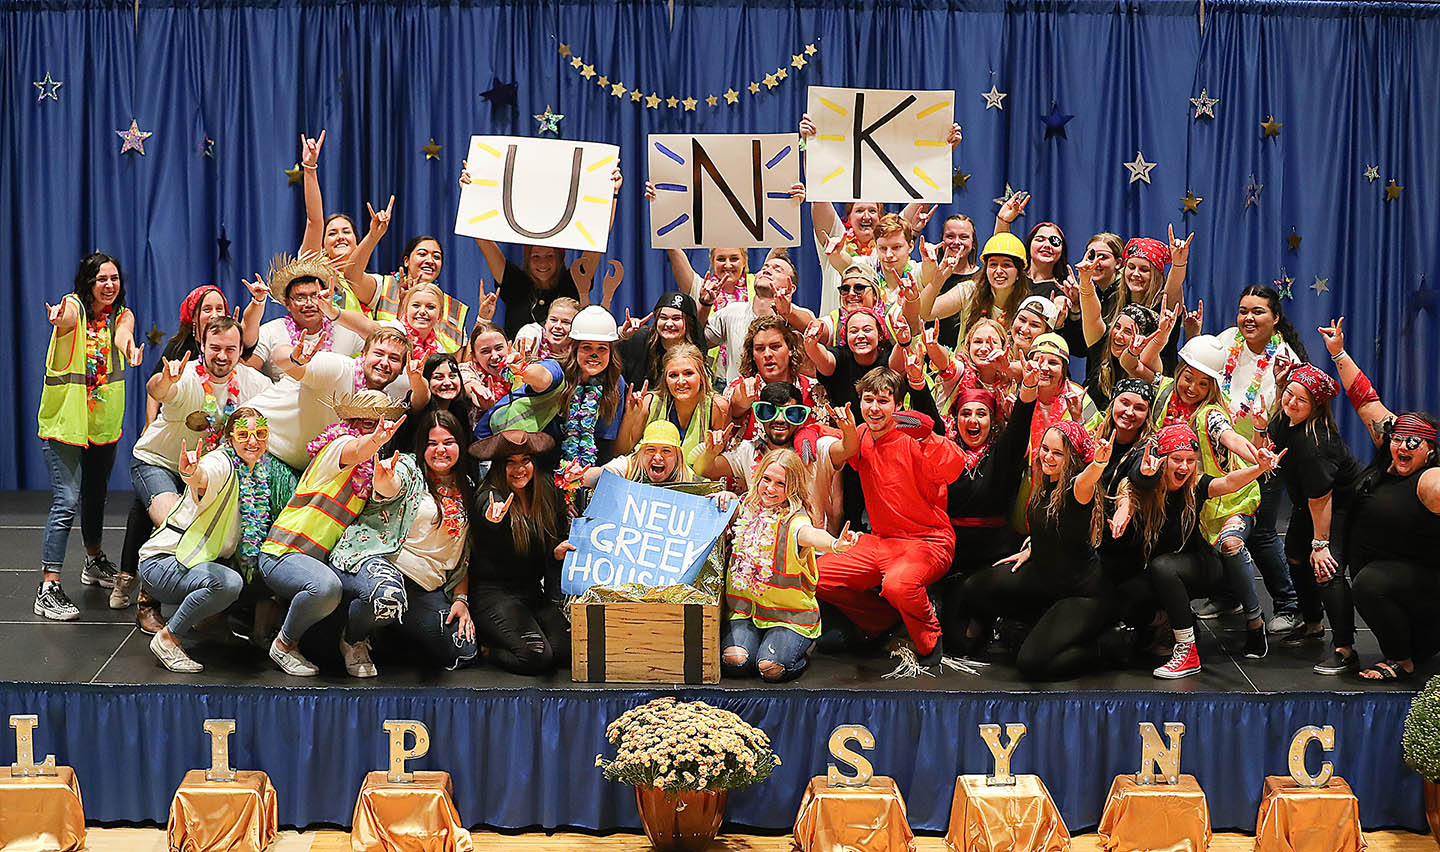 UNK students will perform choreographed dances during the annual homecoming lip-sync contest scheduled for 7 p.m. Thursday, Oct. 27, at the Health and Sports Center on campus.